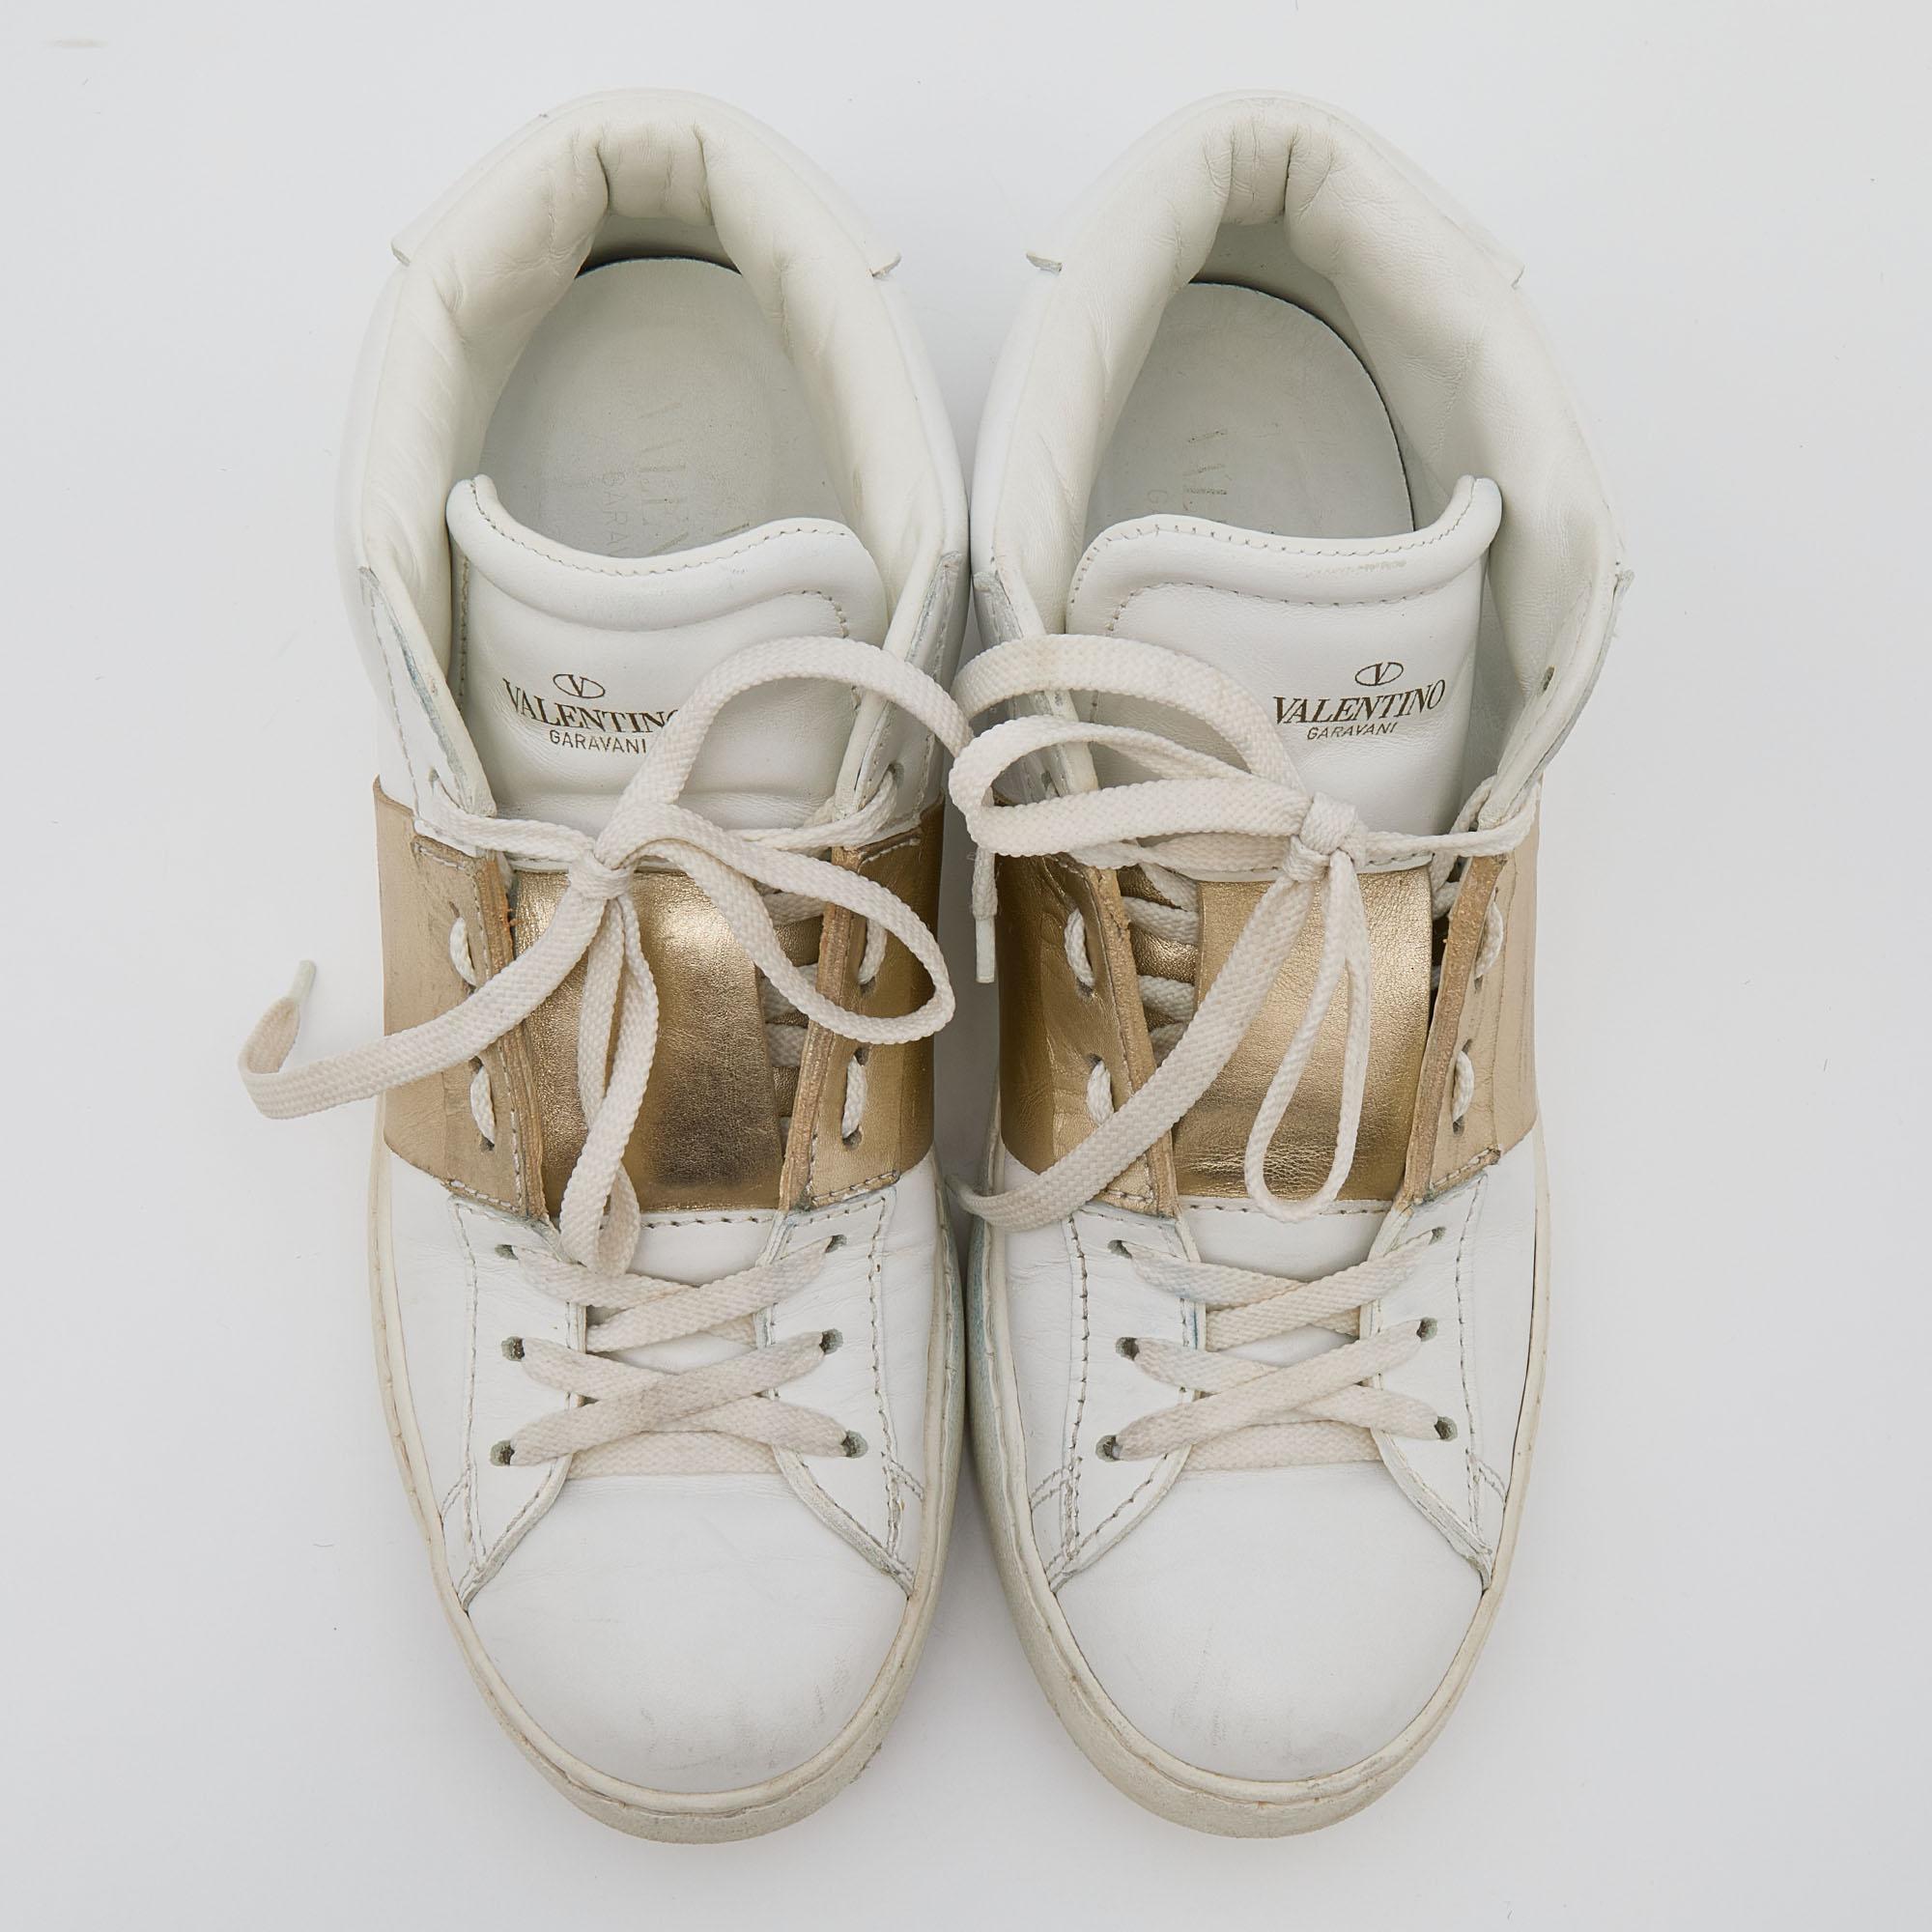 These white Valentino leather sneakers are trendy and casual with a gold strap detailing on the quarter panel. Signature Rockstuds are present on the rear midsoles. The high-top silhouette, rubber soles, and soft insoles make them a favorite for the